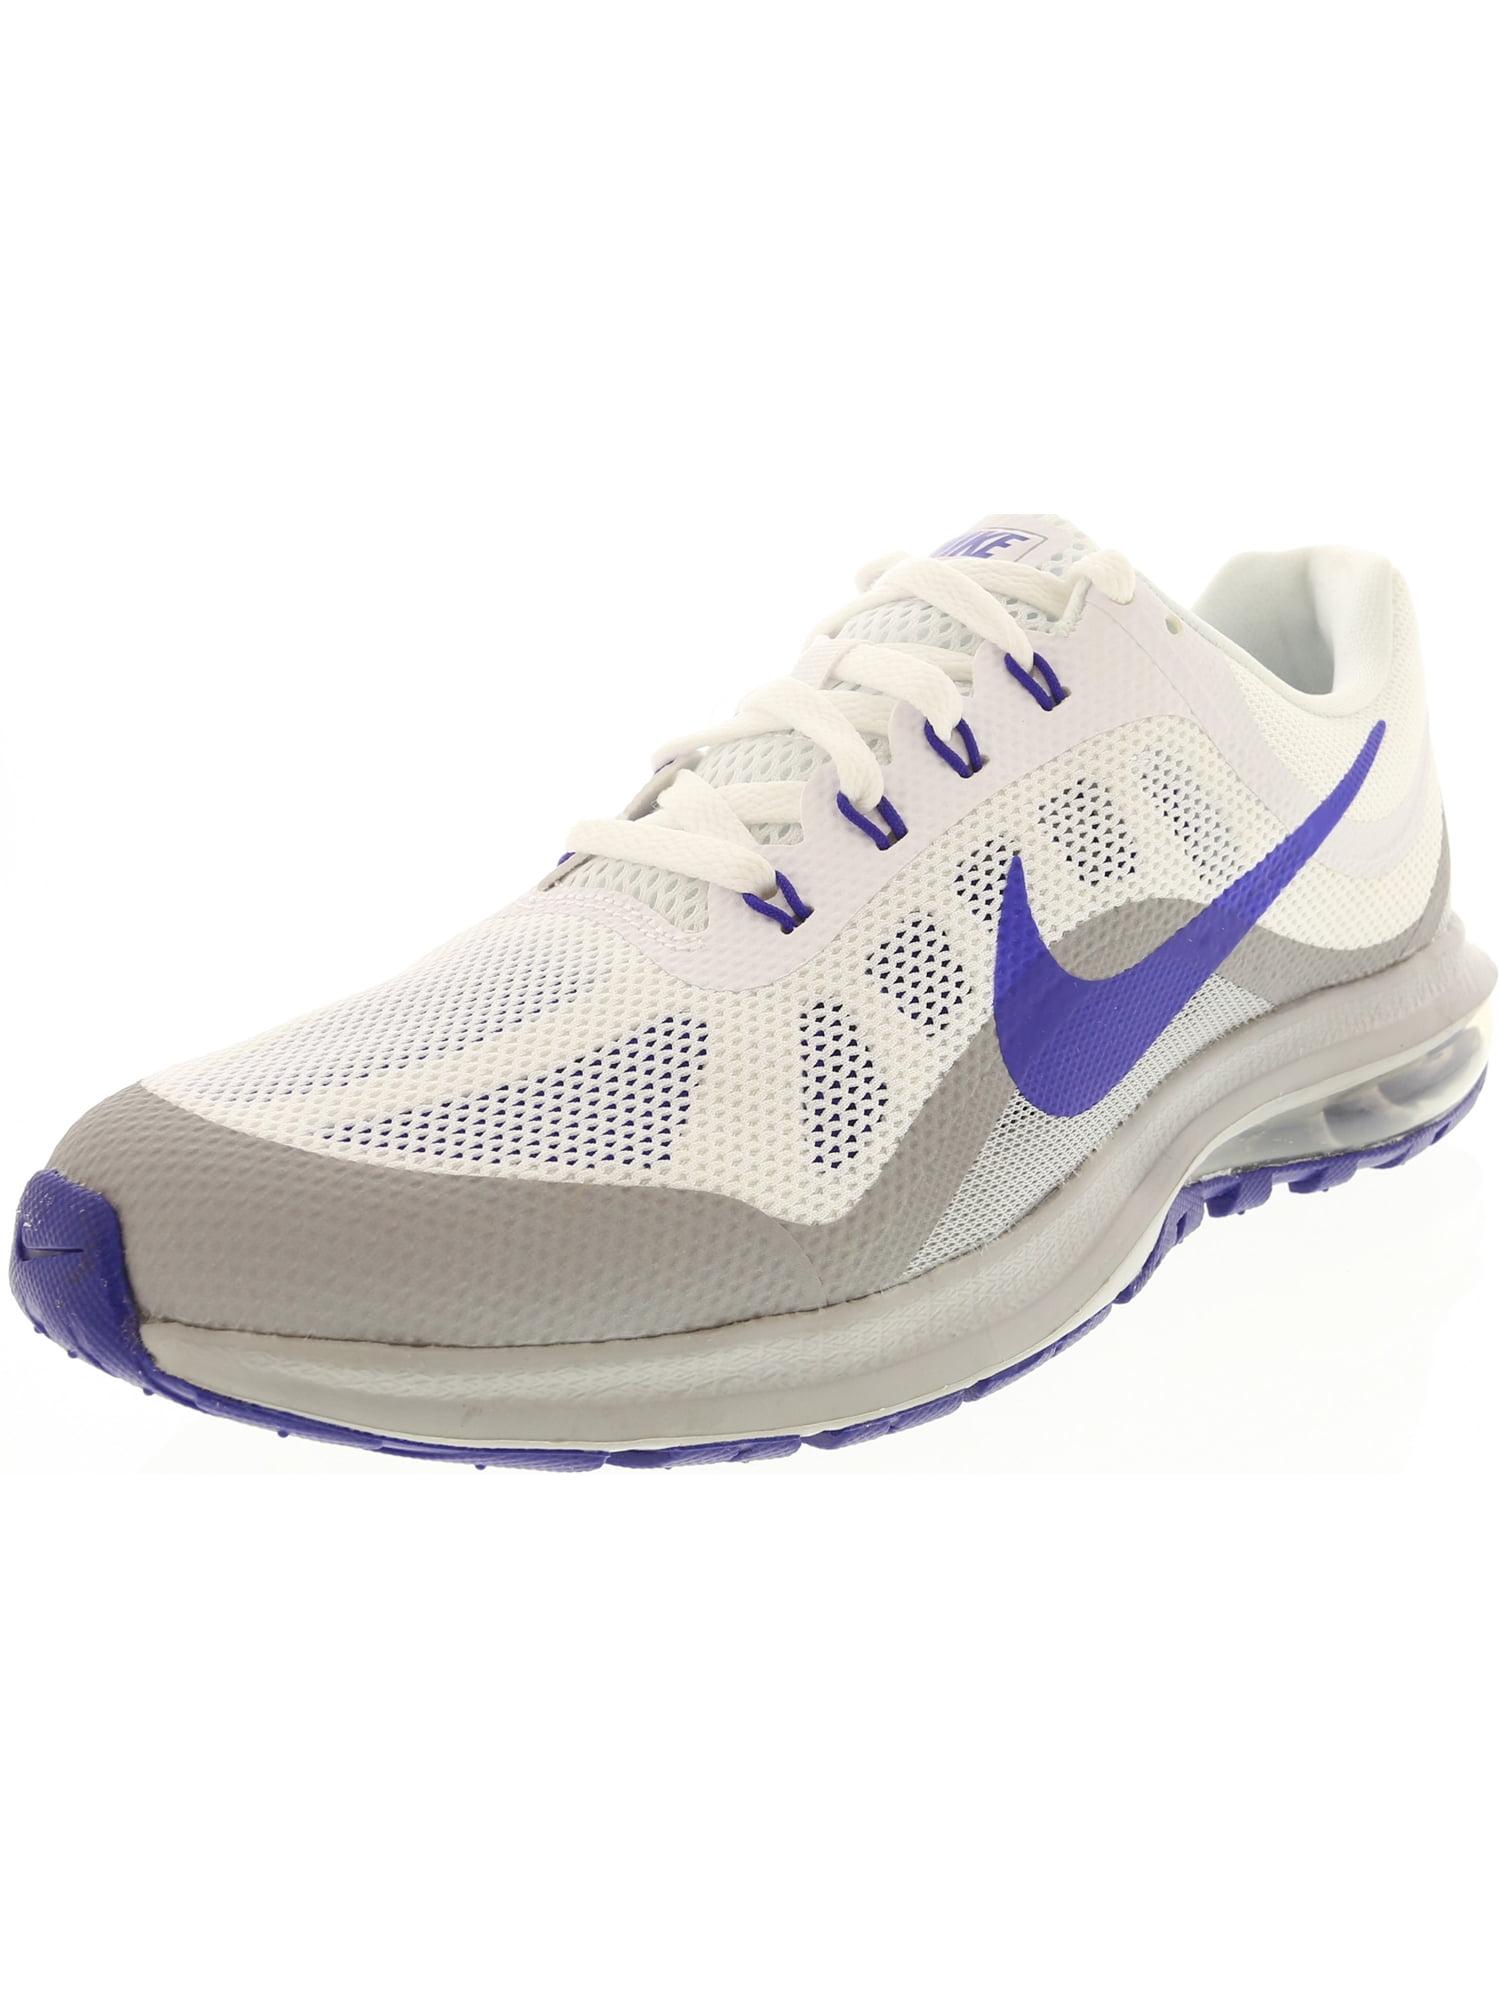 Insulate Immigration zero Nike Men's Air Max Dynasty 2 White / Paramount Blue - Wolf Grey Ankle-High  Running Shoe 10M - Walmart.com